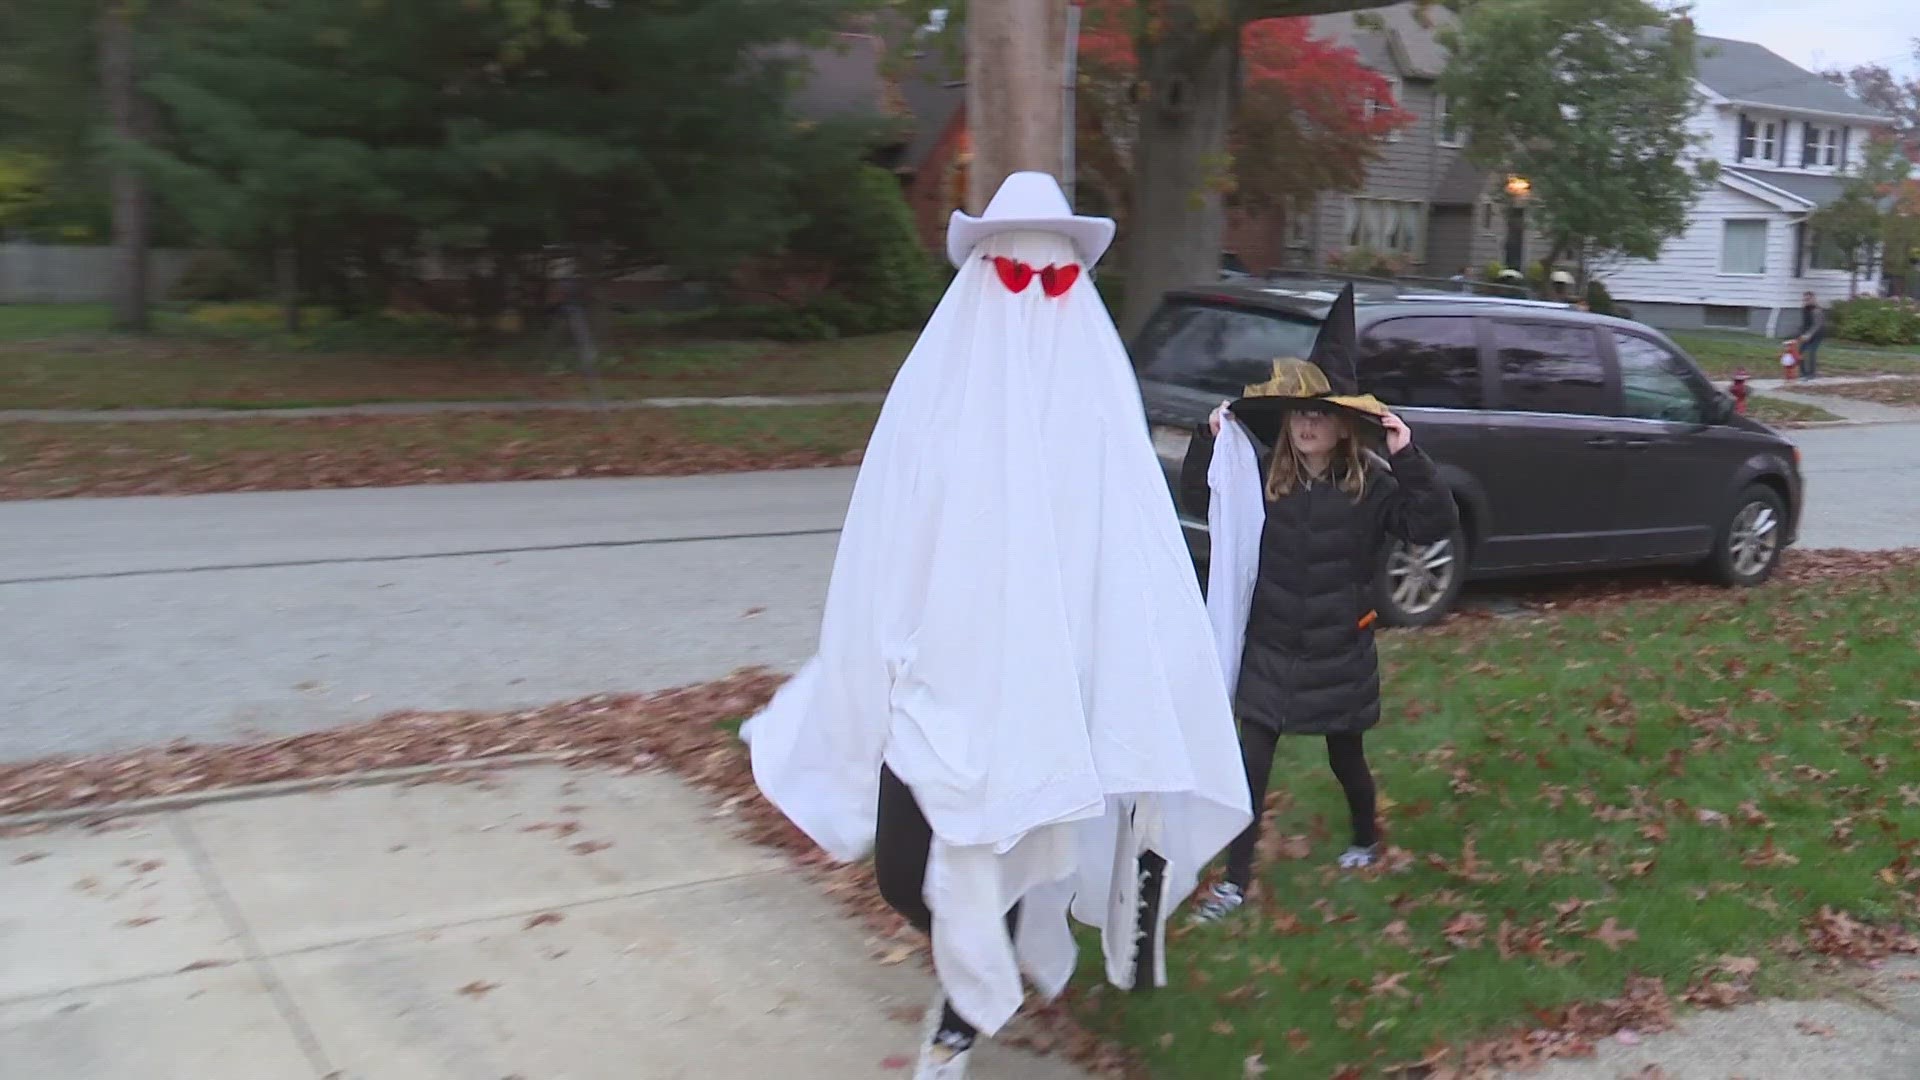 Some snow could even be seen flurrying about in spots, but it didn't deter the Halloween spirit!